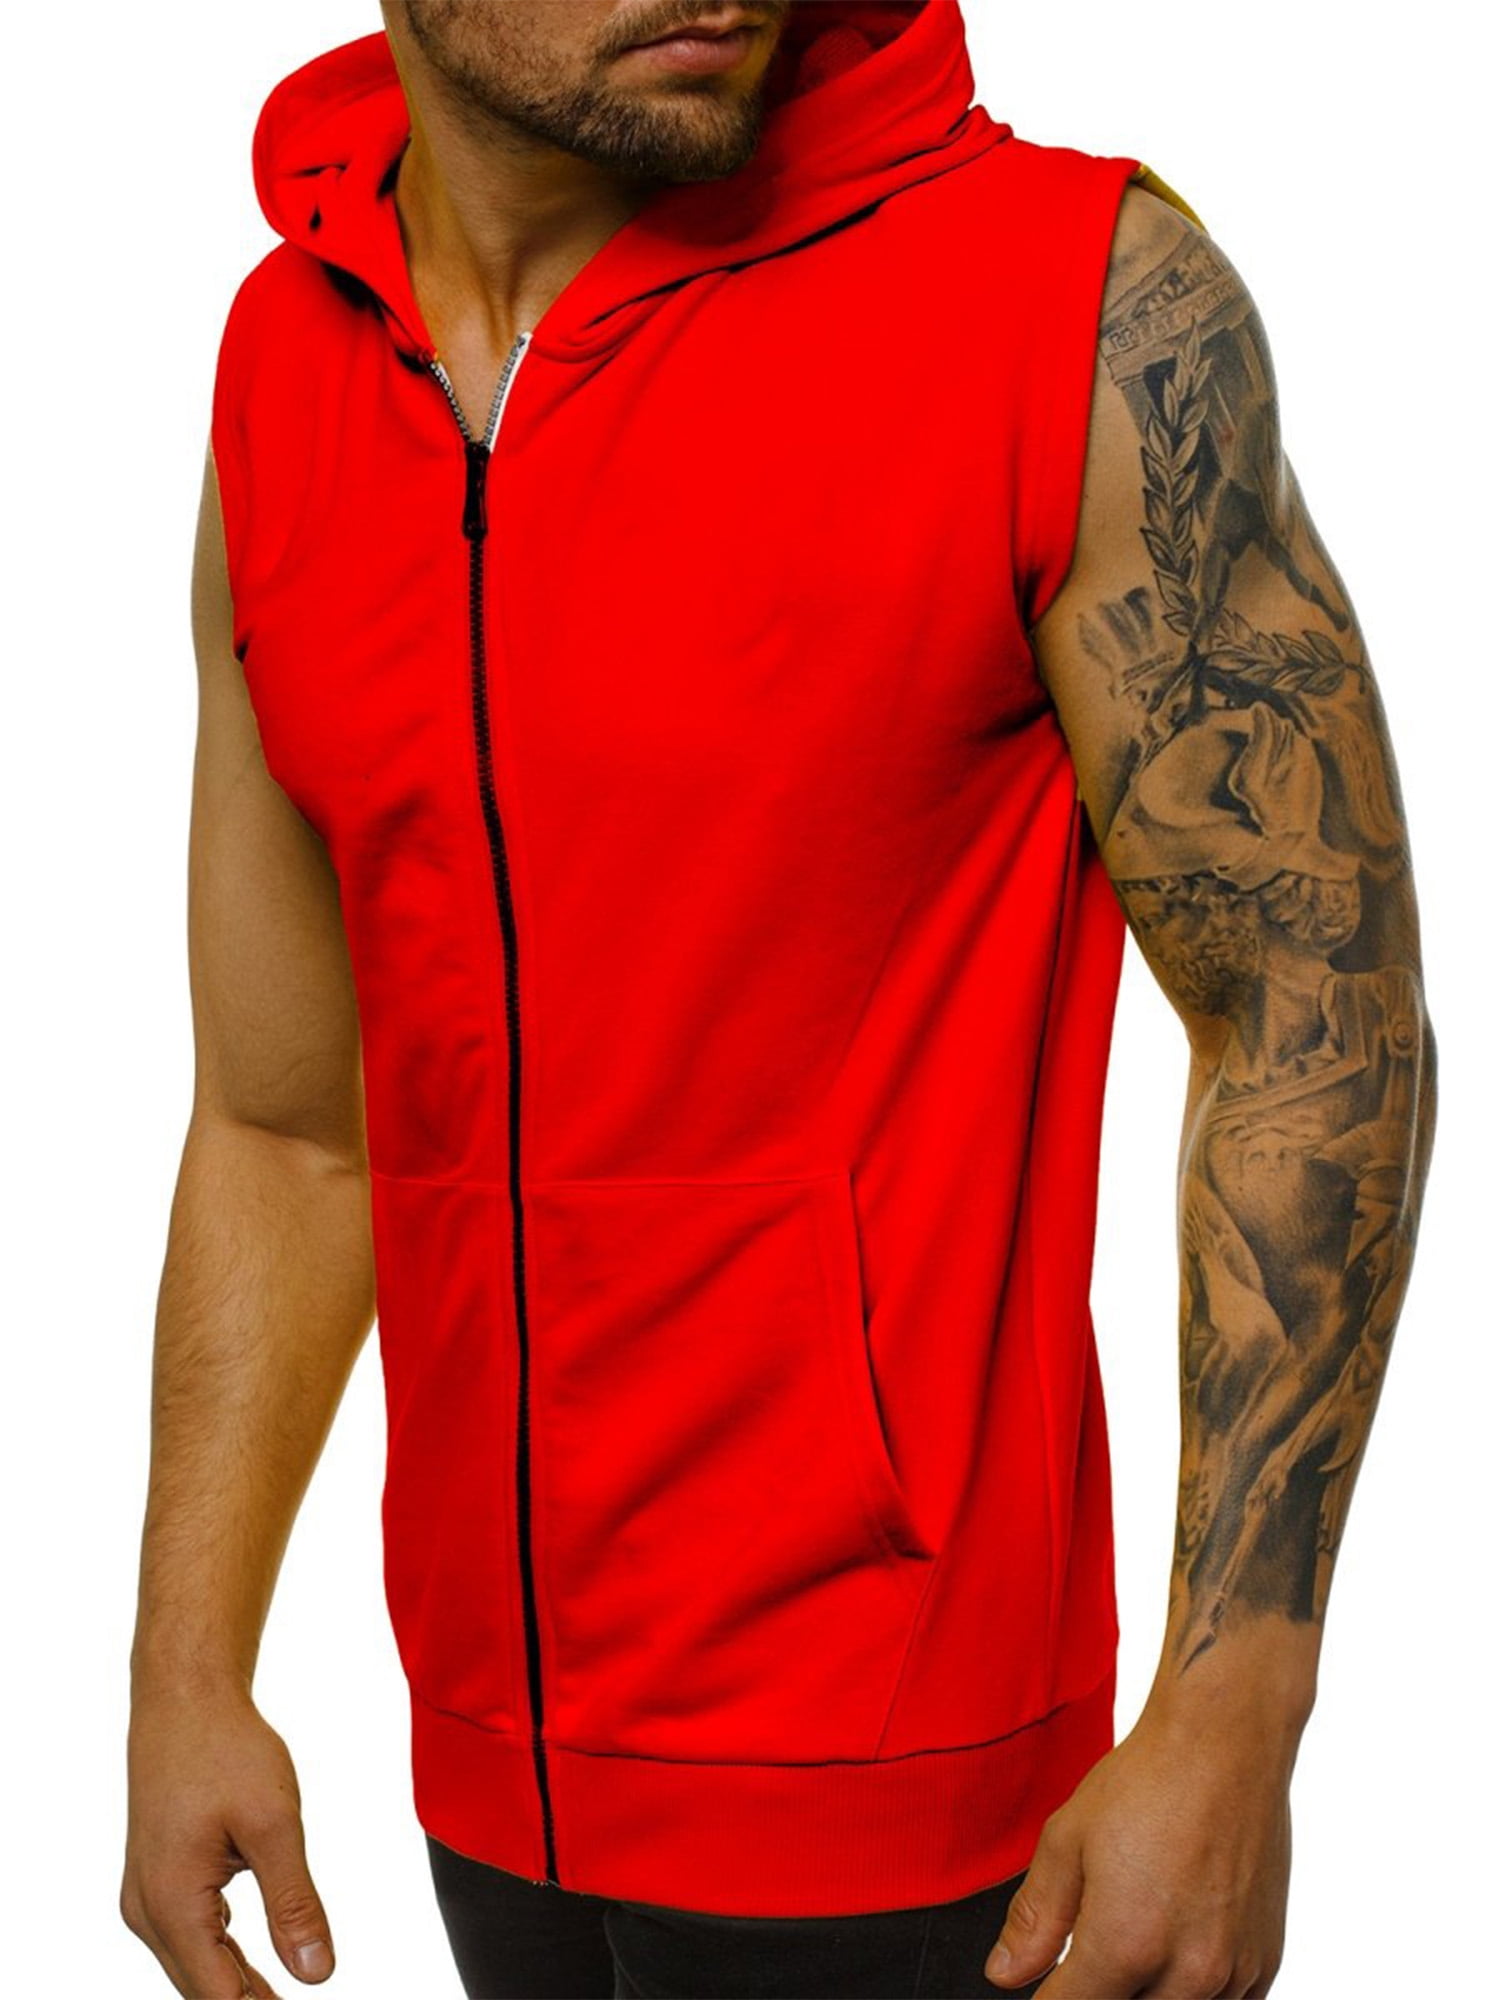 Men Sleeveless Hooded Sweatshirt with Mask Pullover Tank Tops Casual Sport Vest 